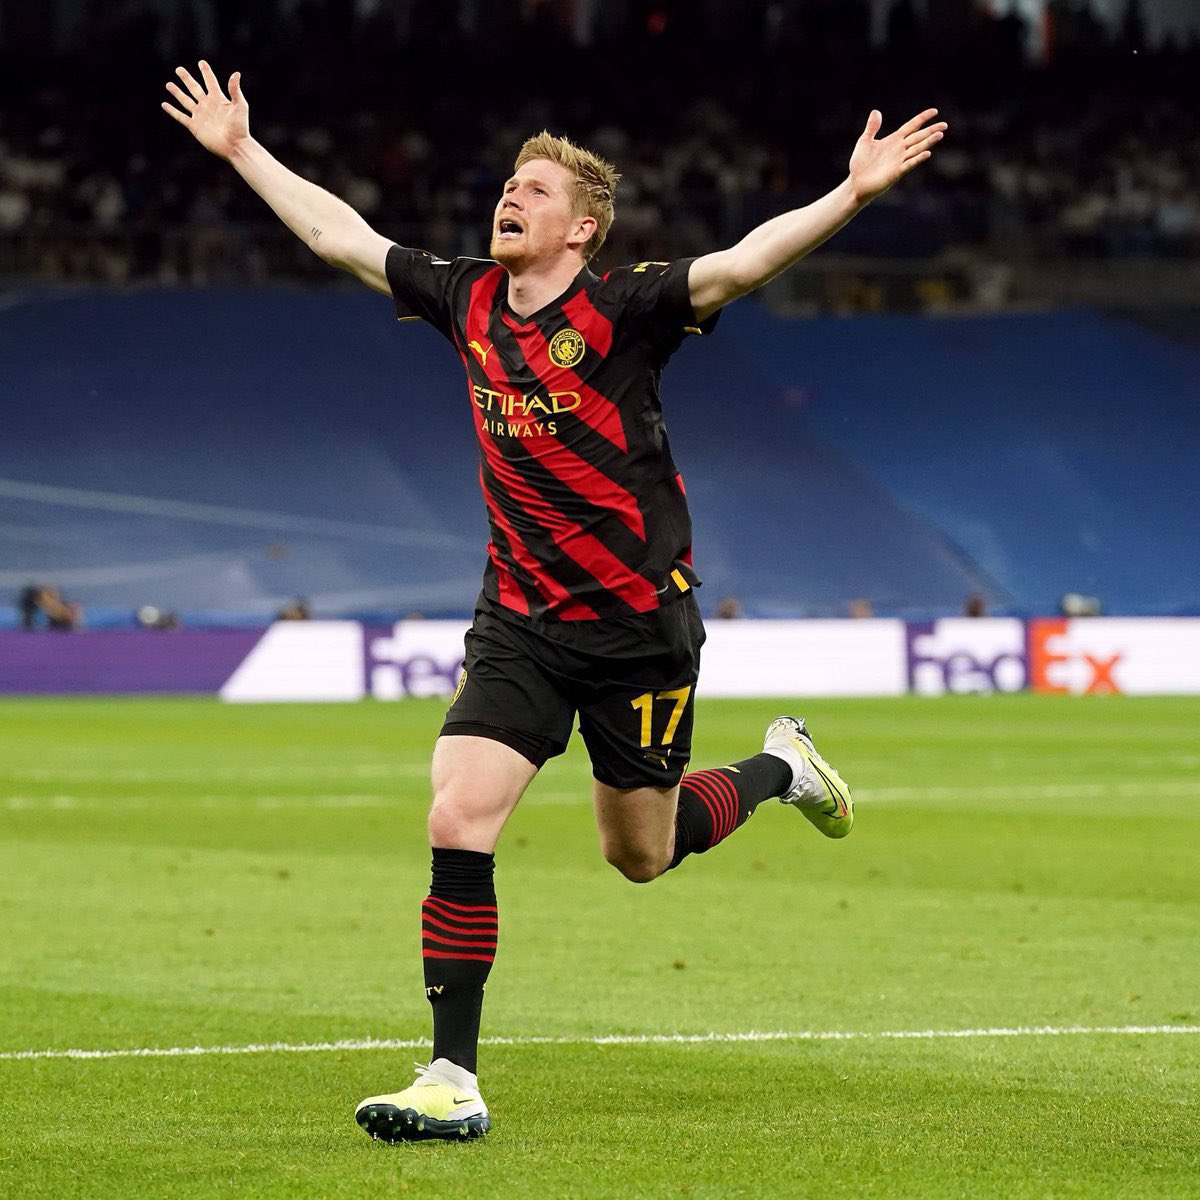 @cityreport_ @KevinDeBruyne This one is icon